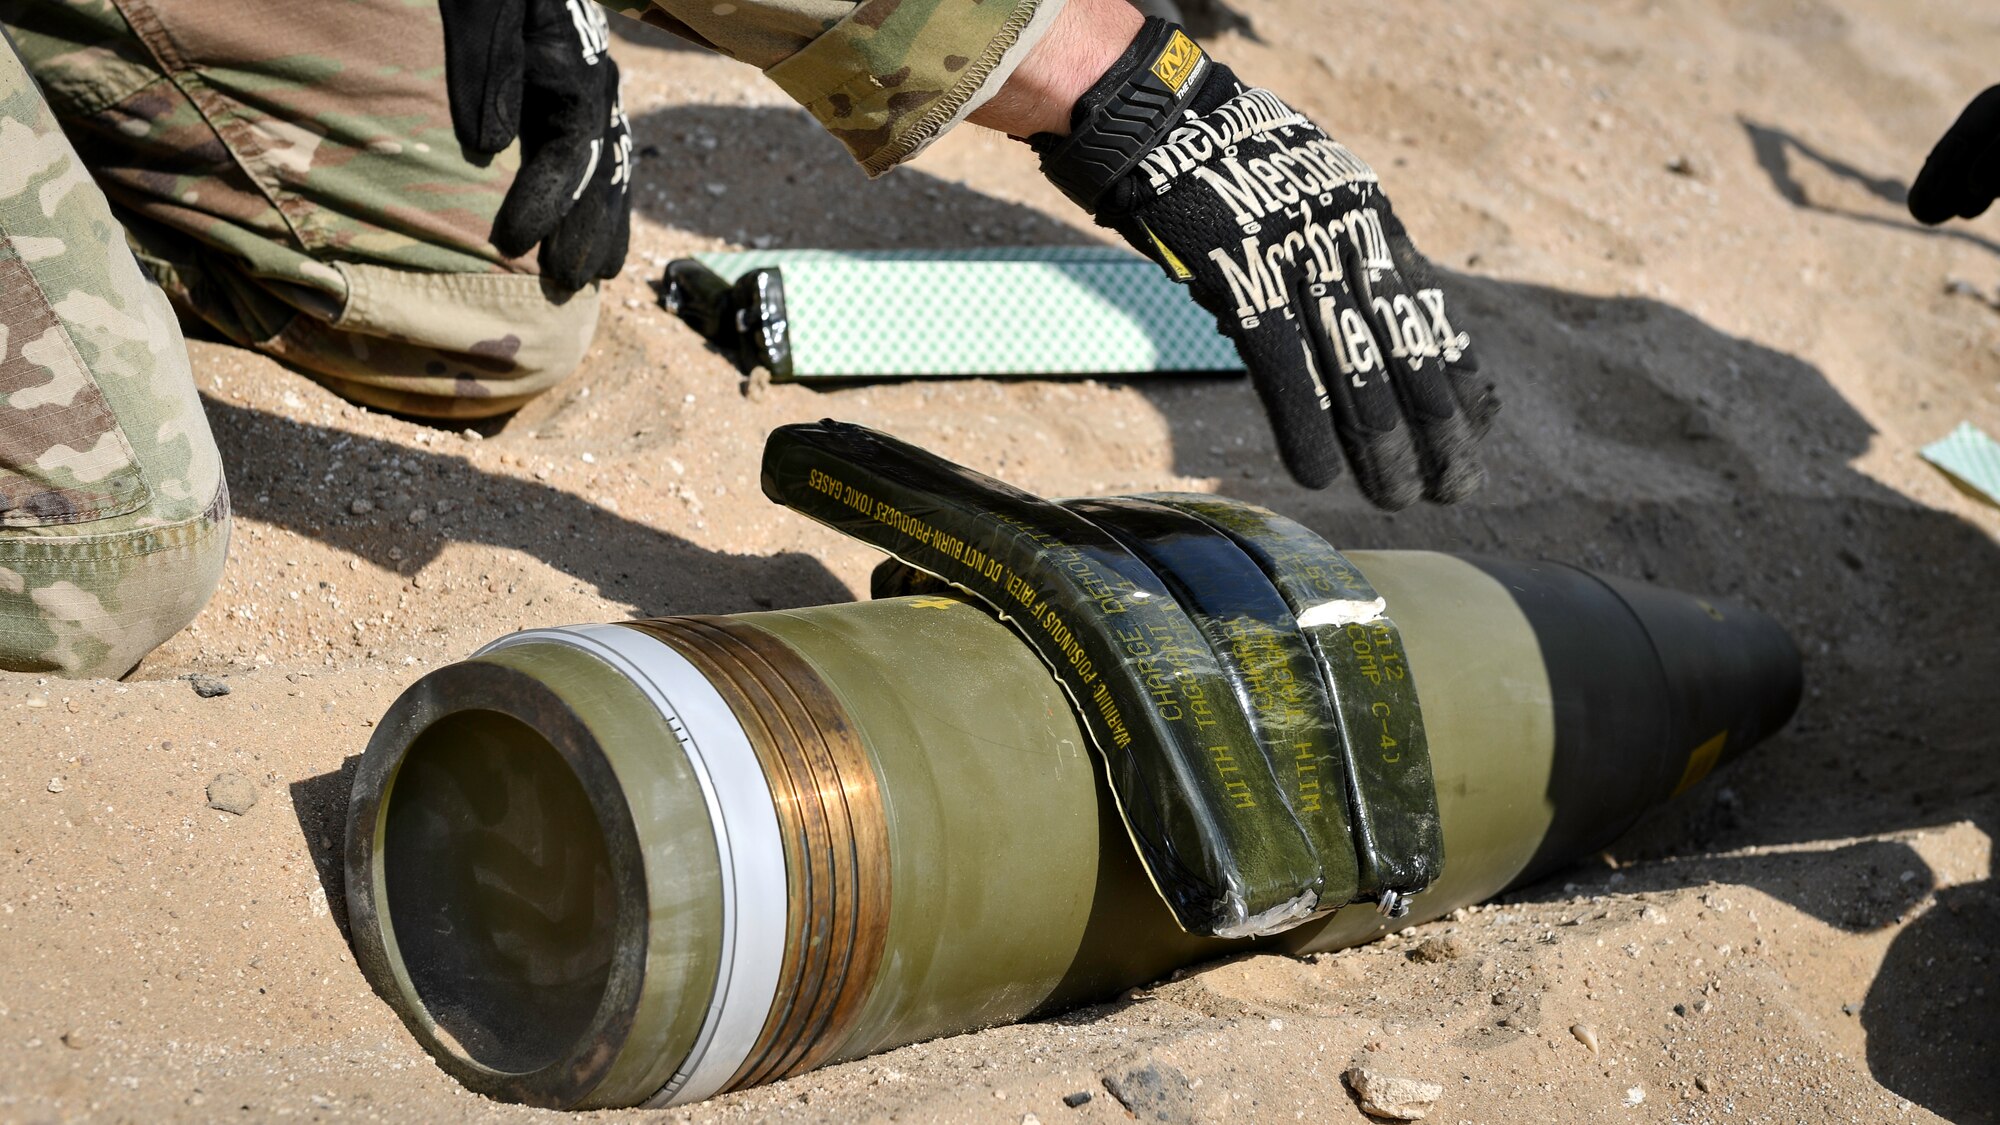 U.S. Army Sgt. 1st Class Jesse Harris, 744th Ordnance Company operations sergeant, places C-4 high explosives on to a 155MM insensitive high explosive round before a munitions disposal training at the Udari Range, Kuwait, Sept. 30, 2019. C-4’s high cutting ability when detonated makes it the ideal explosive to use in disposal or controlled detonations of insensitive high explosive rounds.